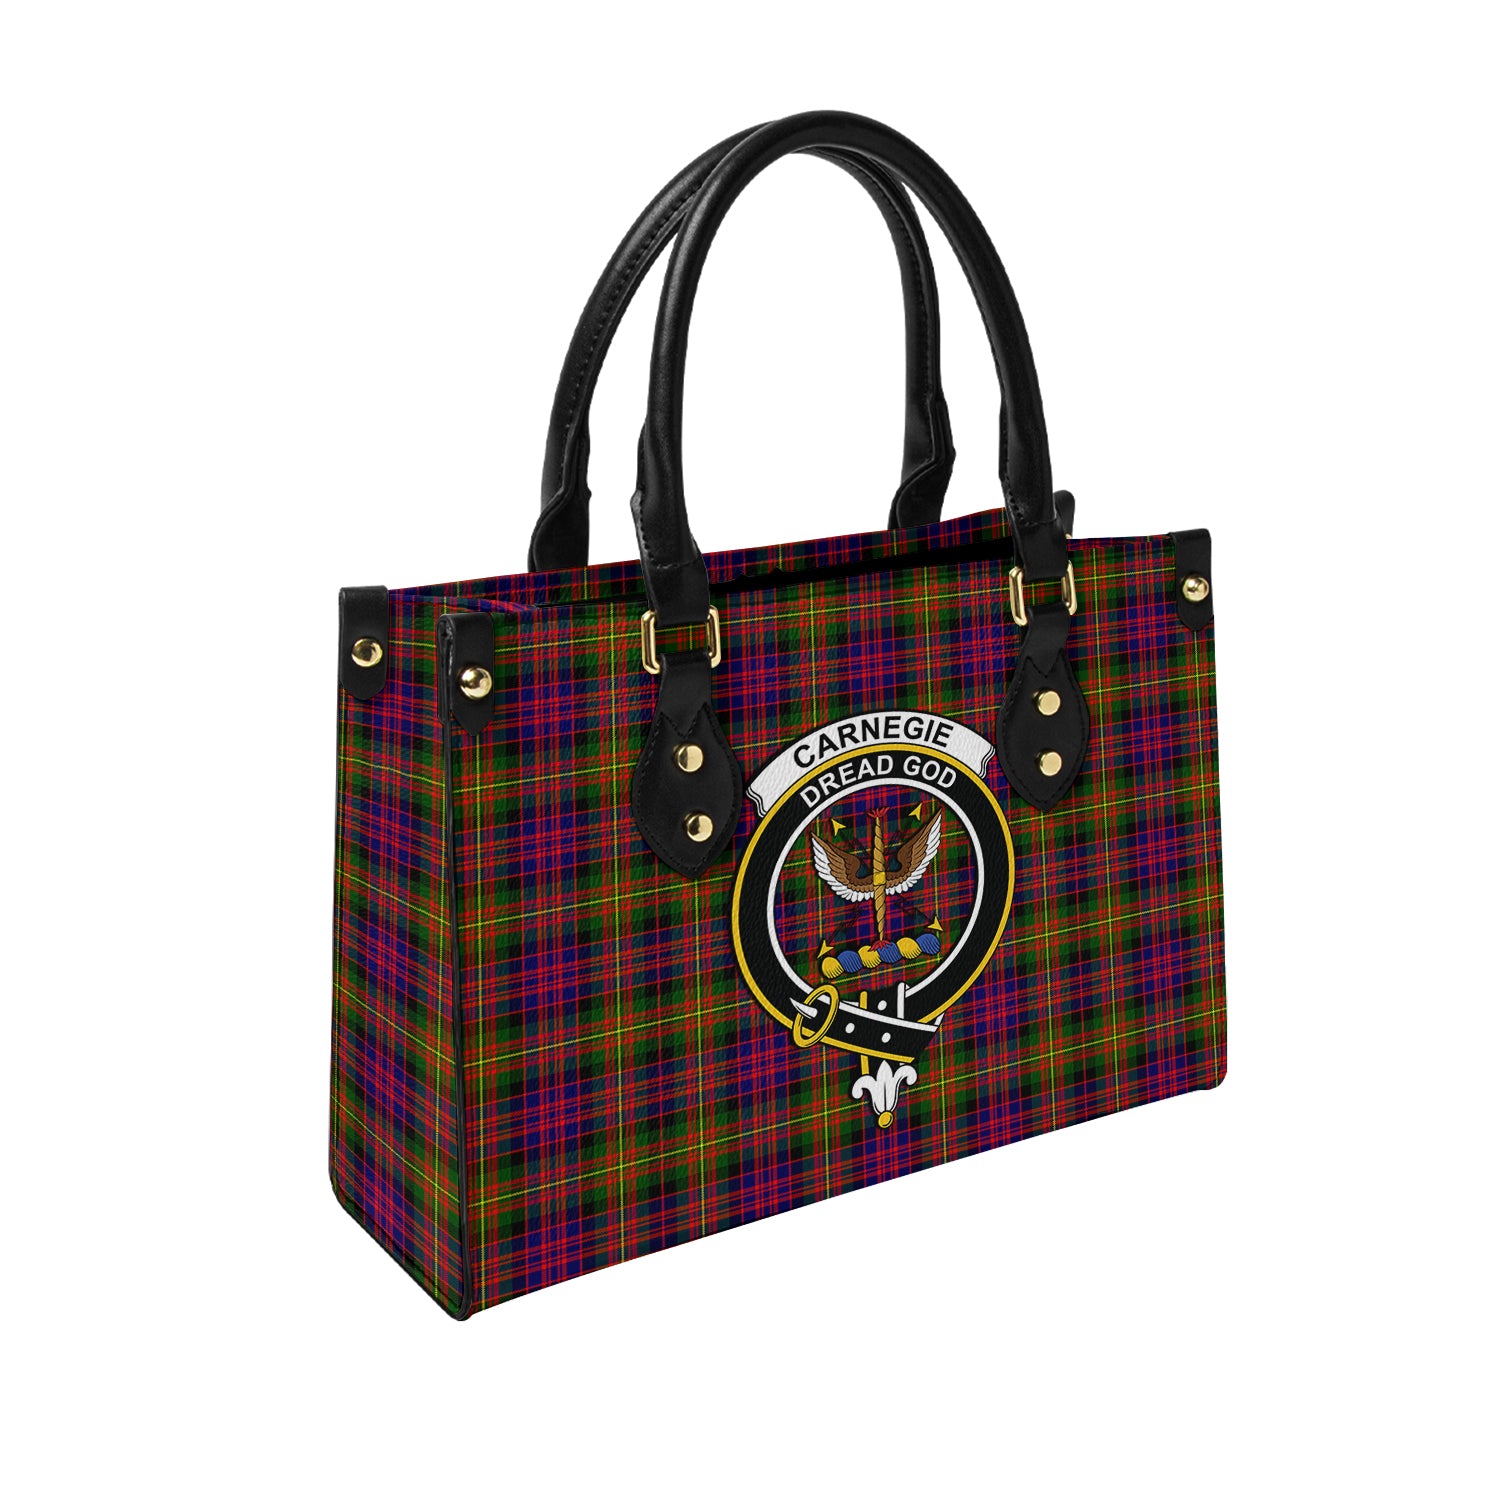 carnegie-modern-tartan-leather-bag-with-family-crest